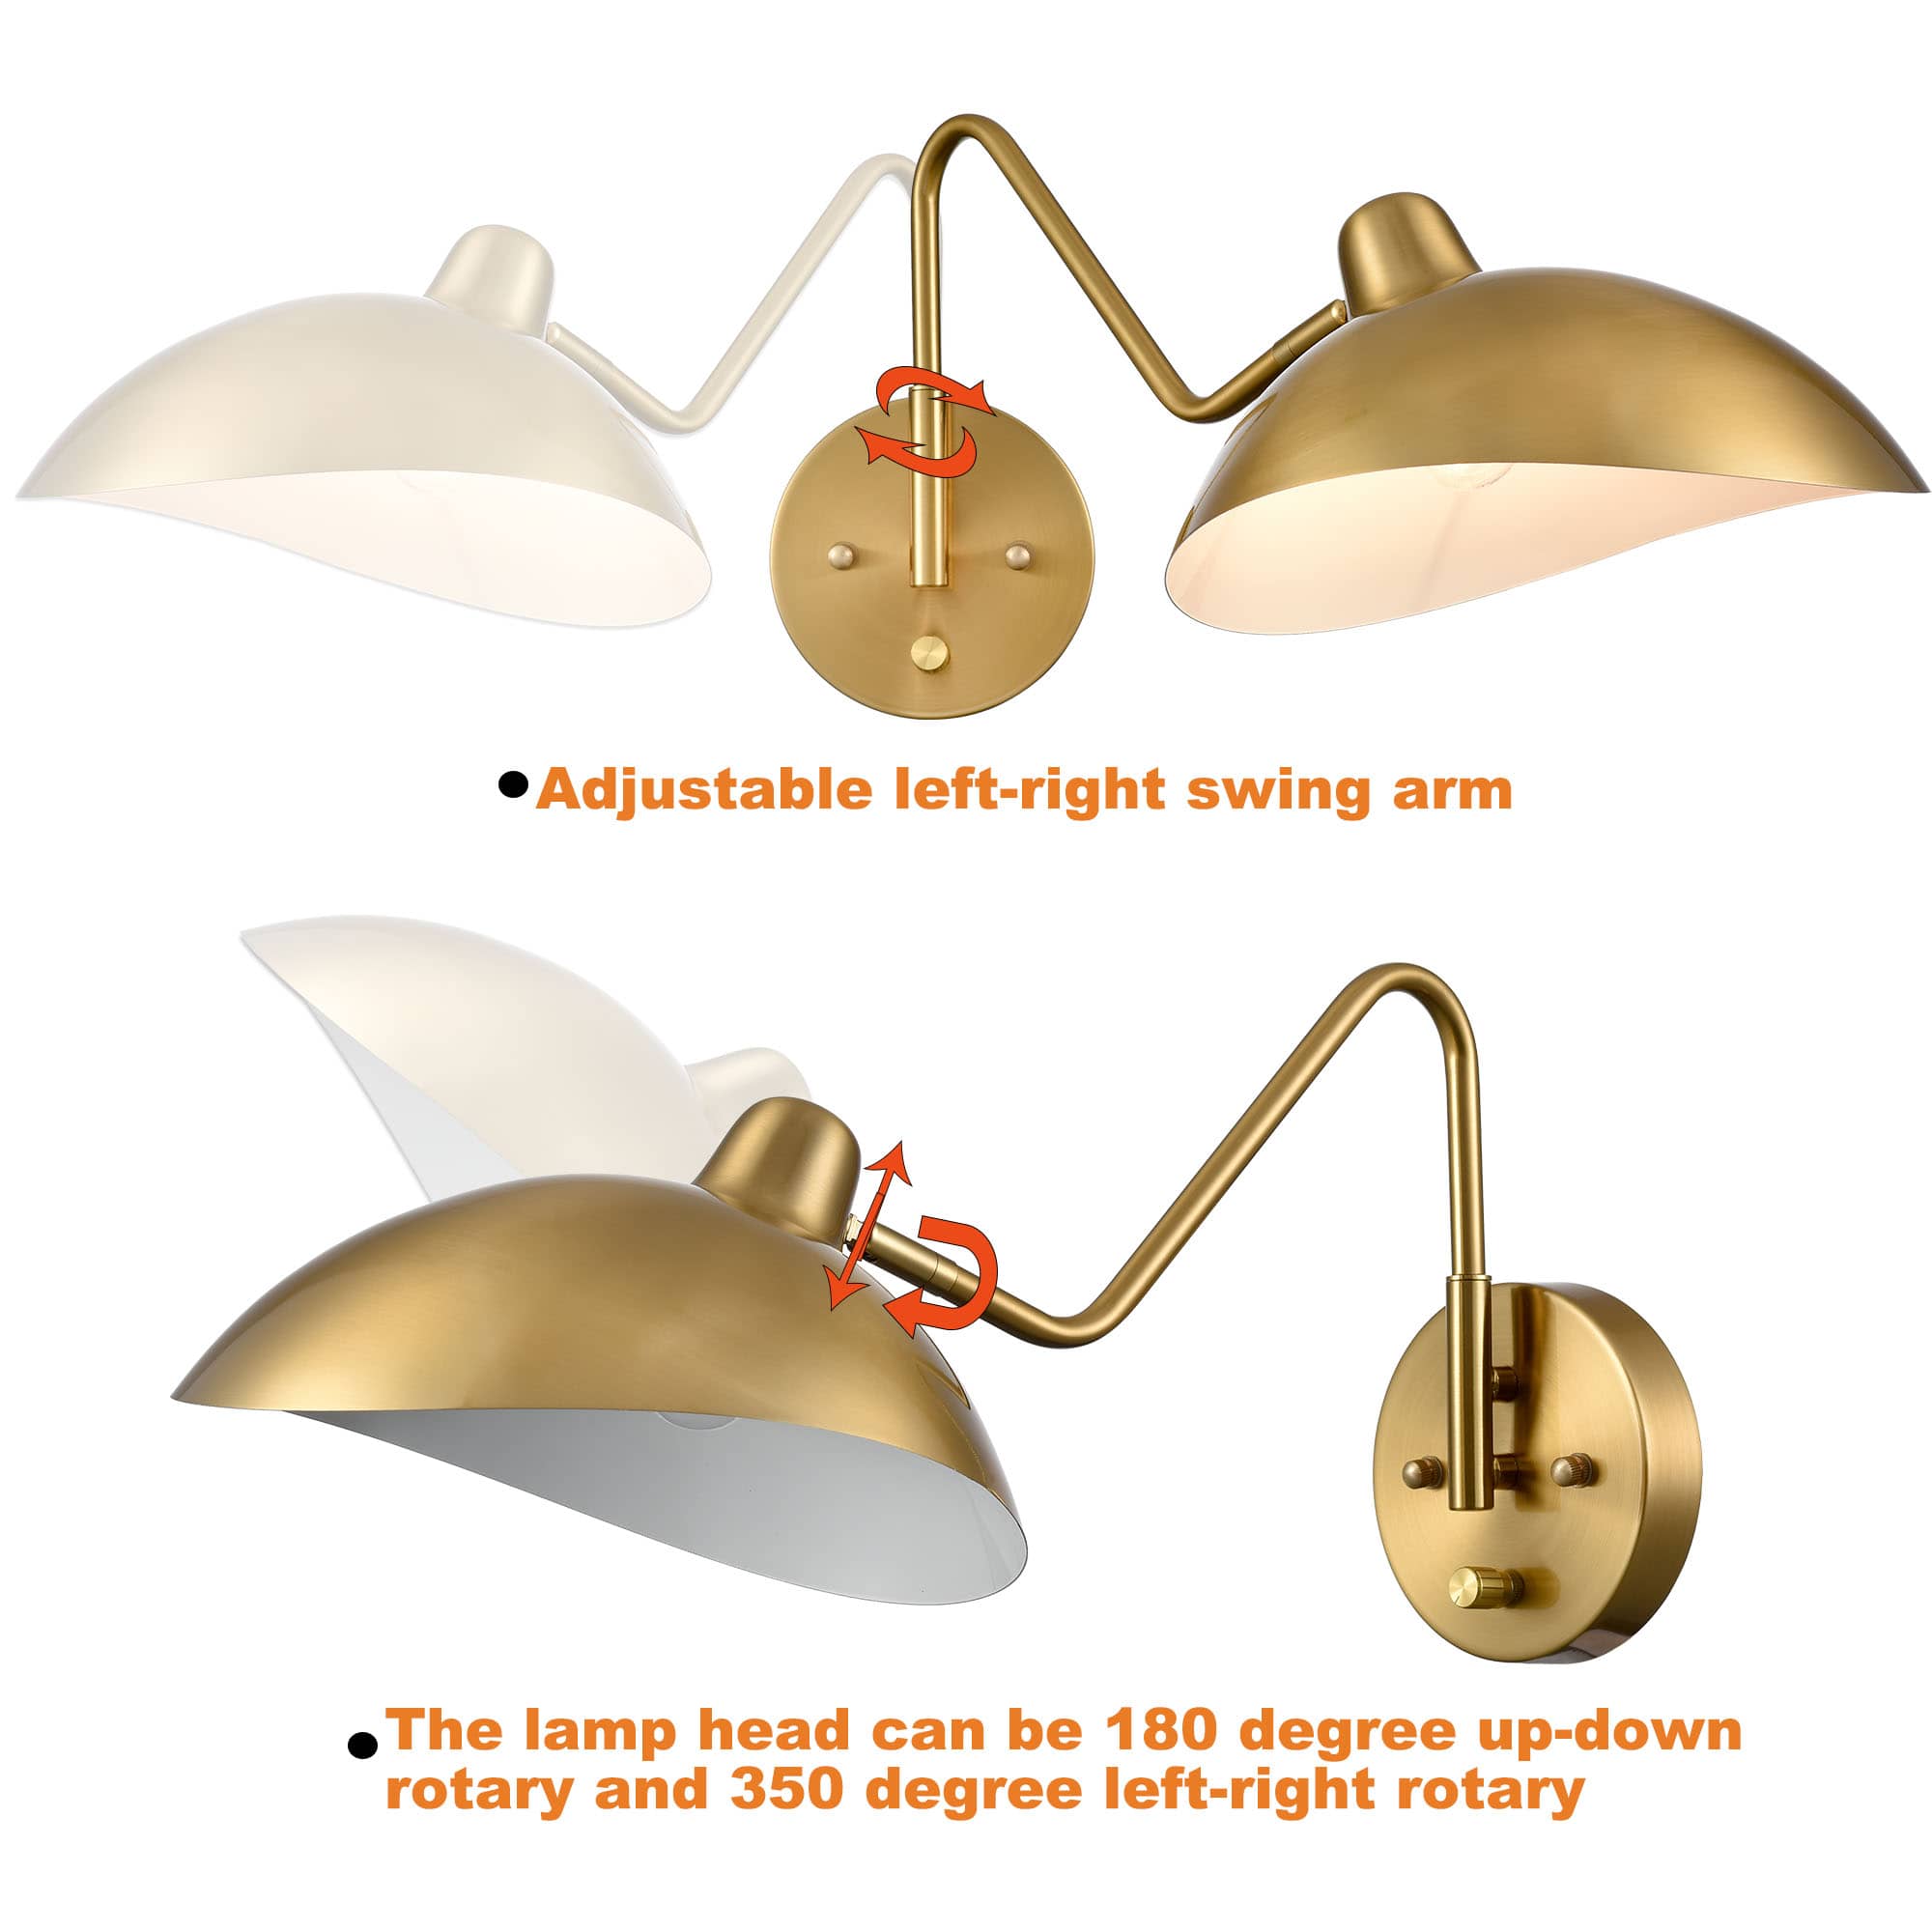 Set of 2 Modern Brass Metal Wall Sconce with On/Off Switch Plug-in or Hardwired Swing Arm Wall Light Fixture